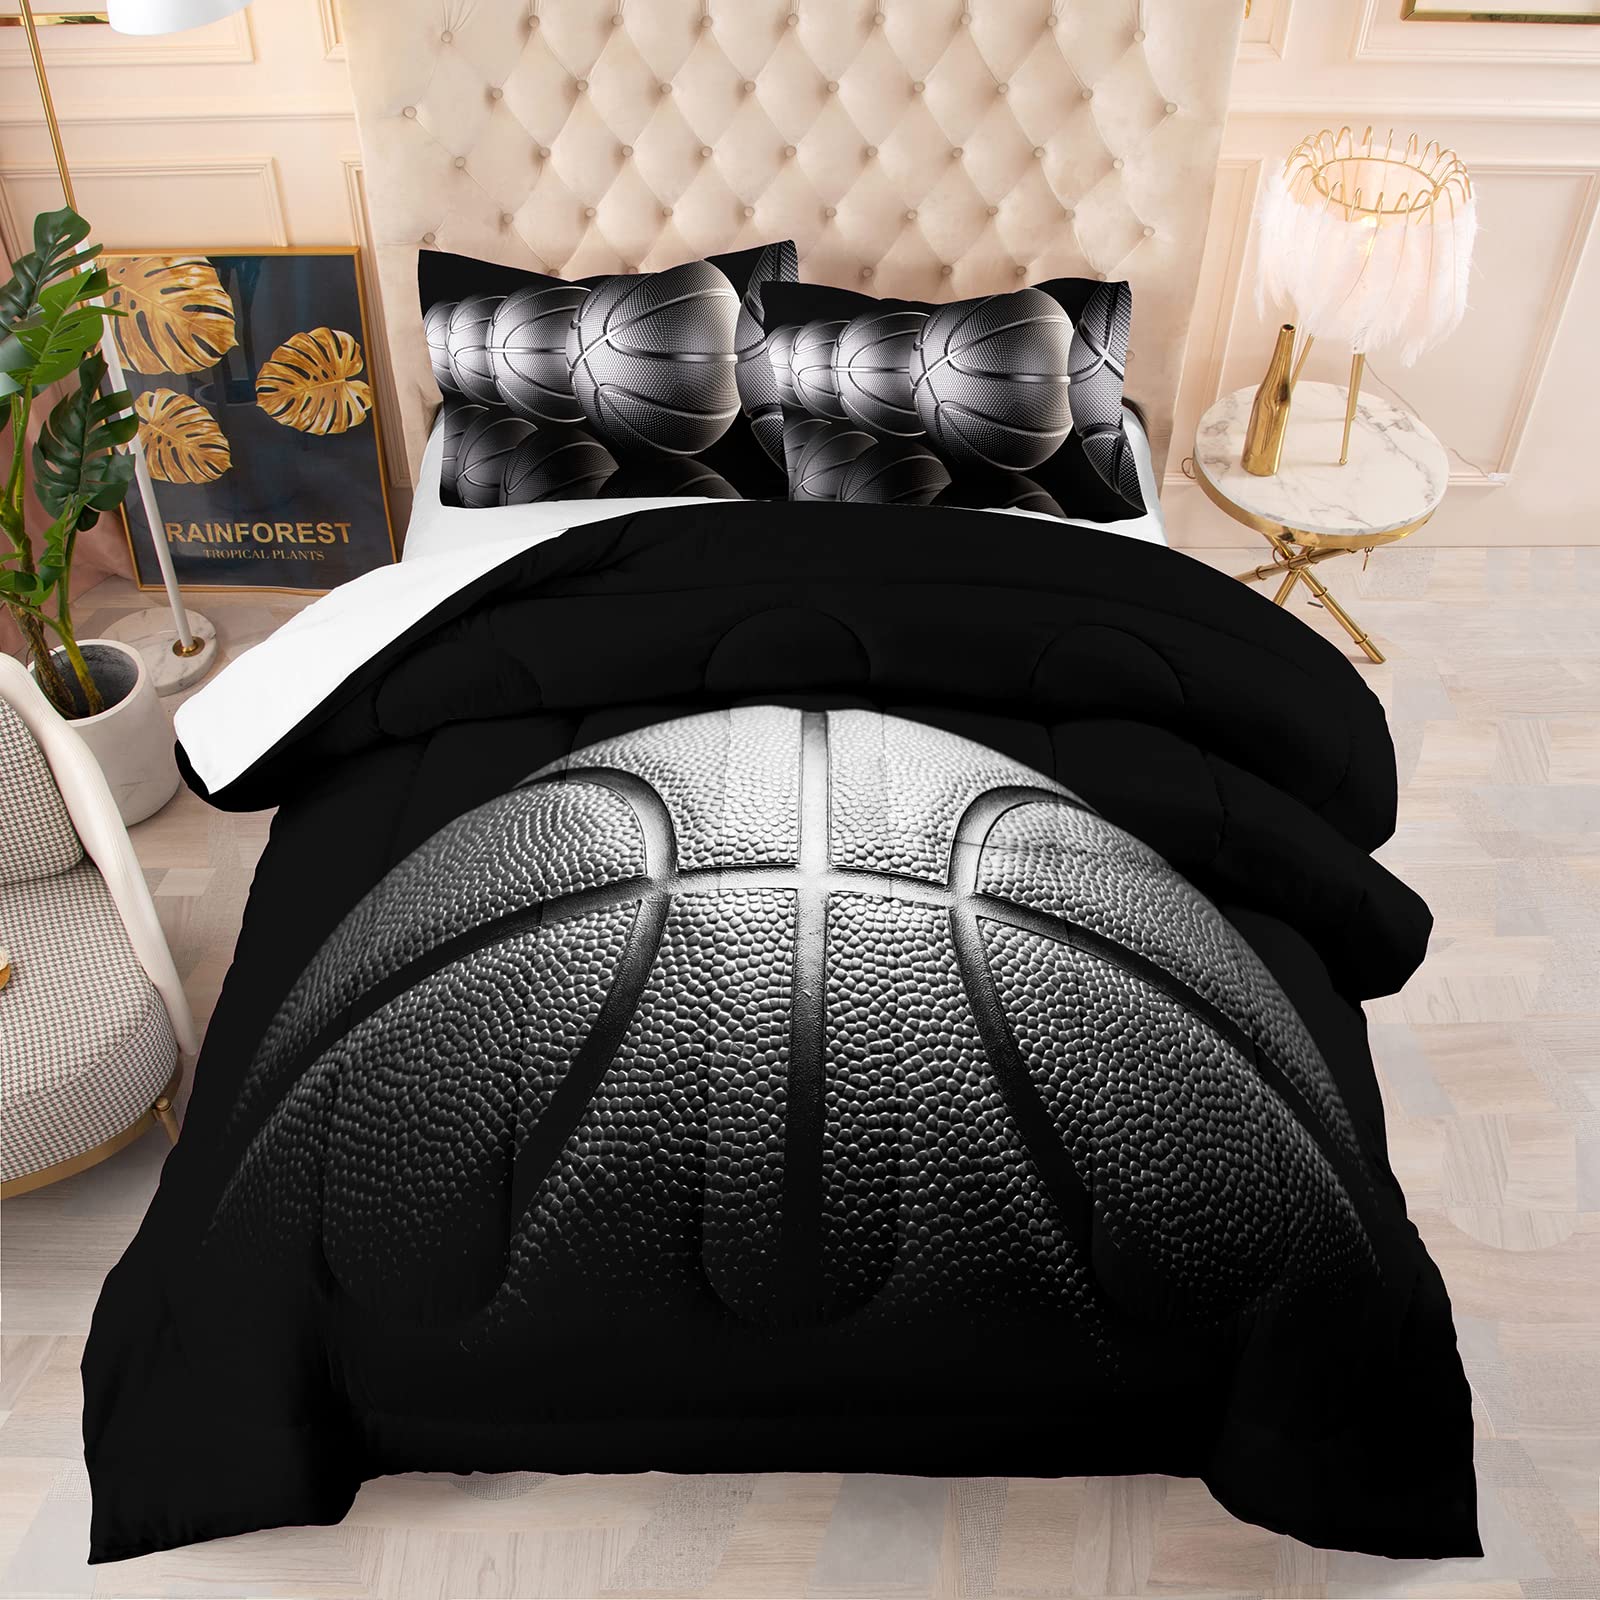 Tailor Shop Basketball Comforter Set for Boys Kids Teens Ultra Soft Microfiber Black and Gray Sports Theme Basketball Bedding Sets Full Size with 1 Comforter and 2 Pillowcases…